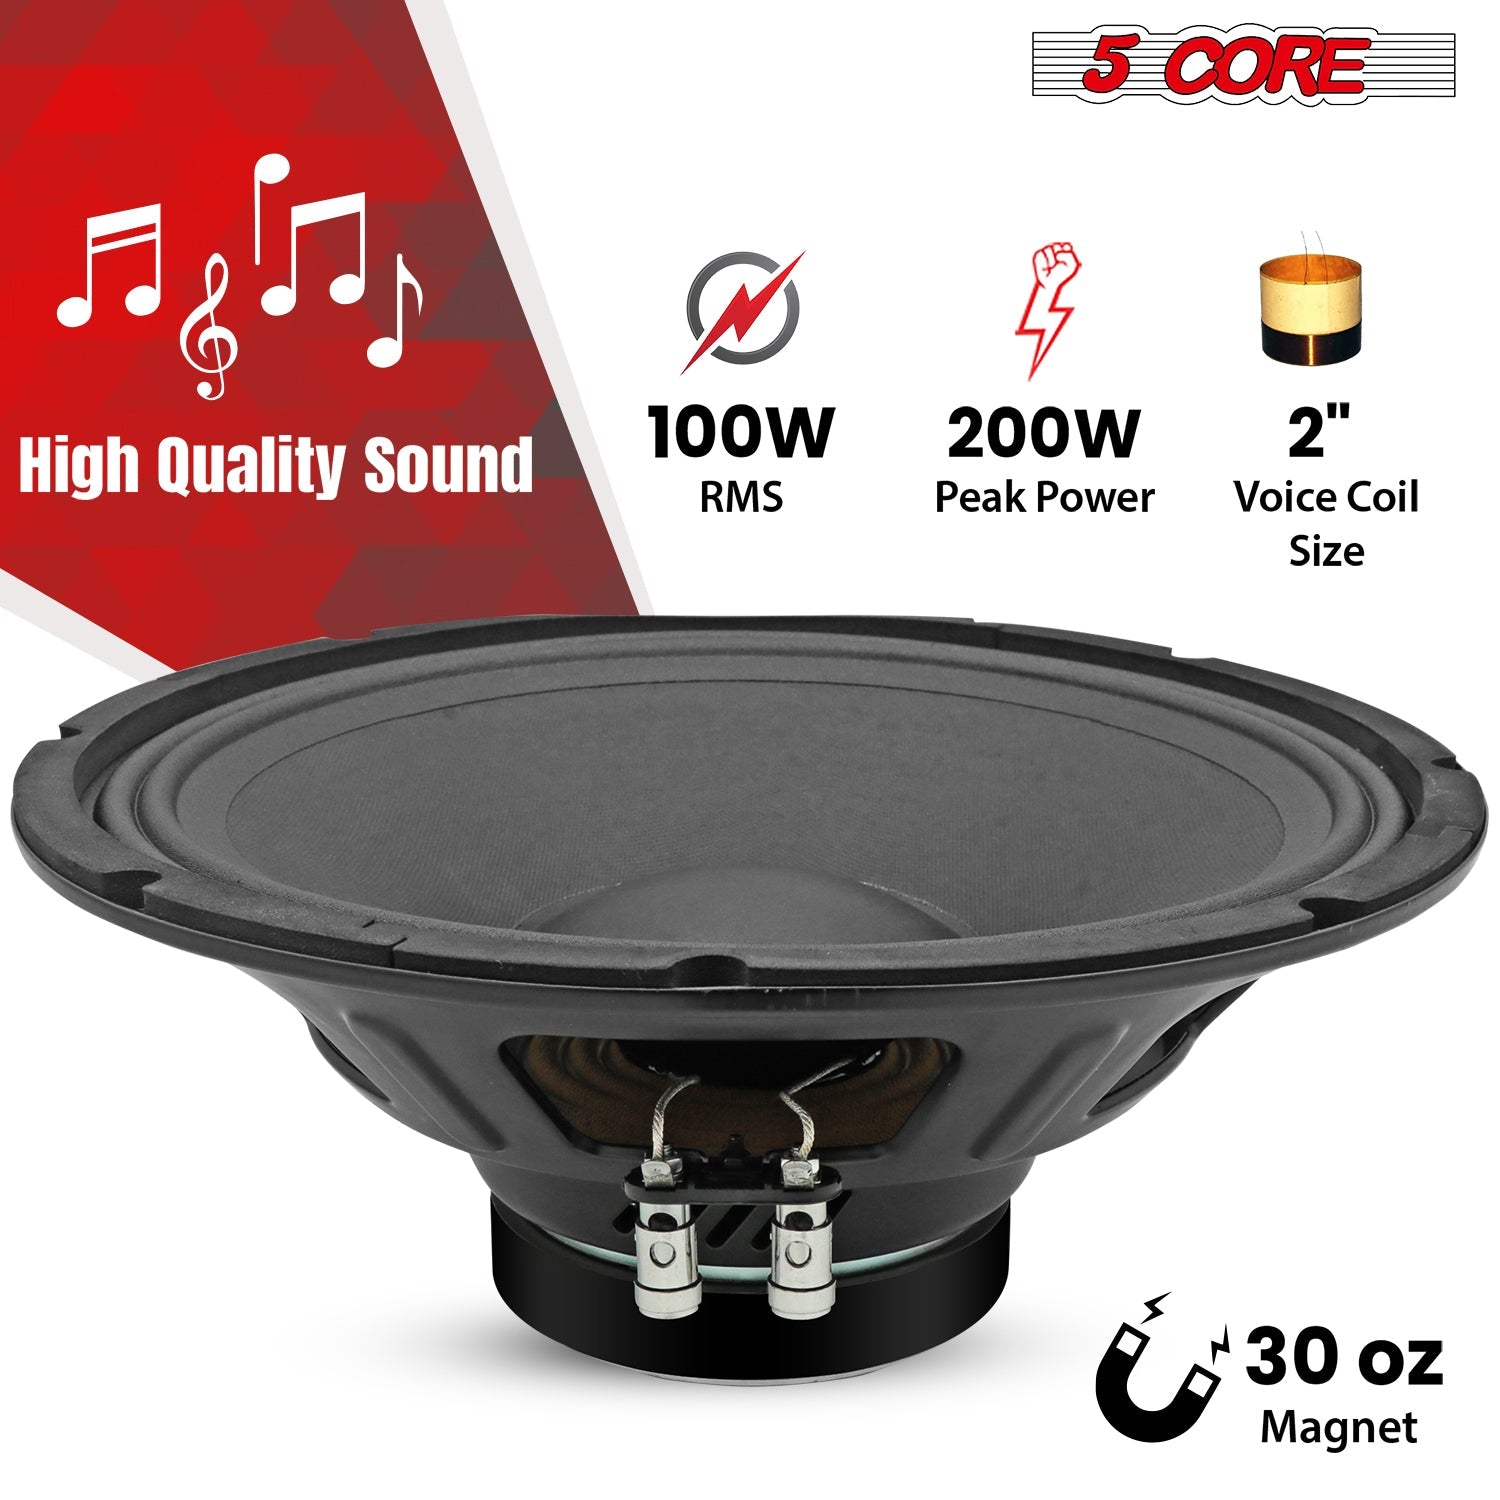 5 Core 12 Inch PA DJ Subwoofer, 200W Max Power, Pro Audio 8Ohm Replacement Subwoofer